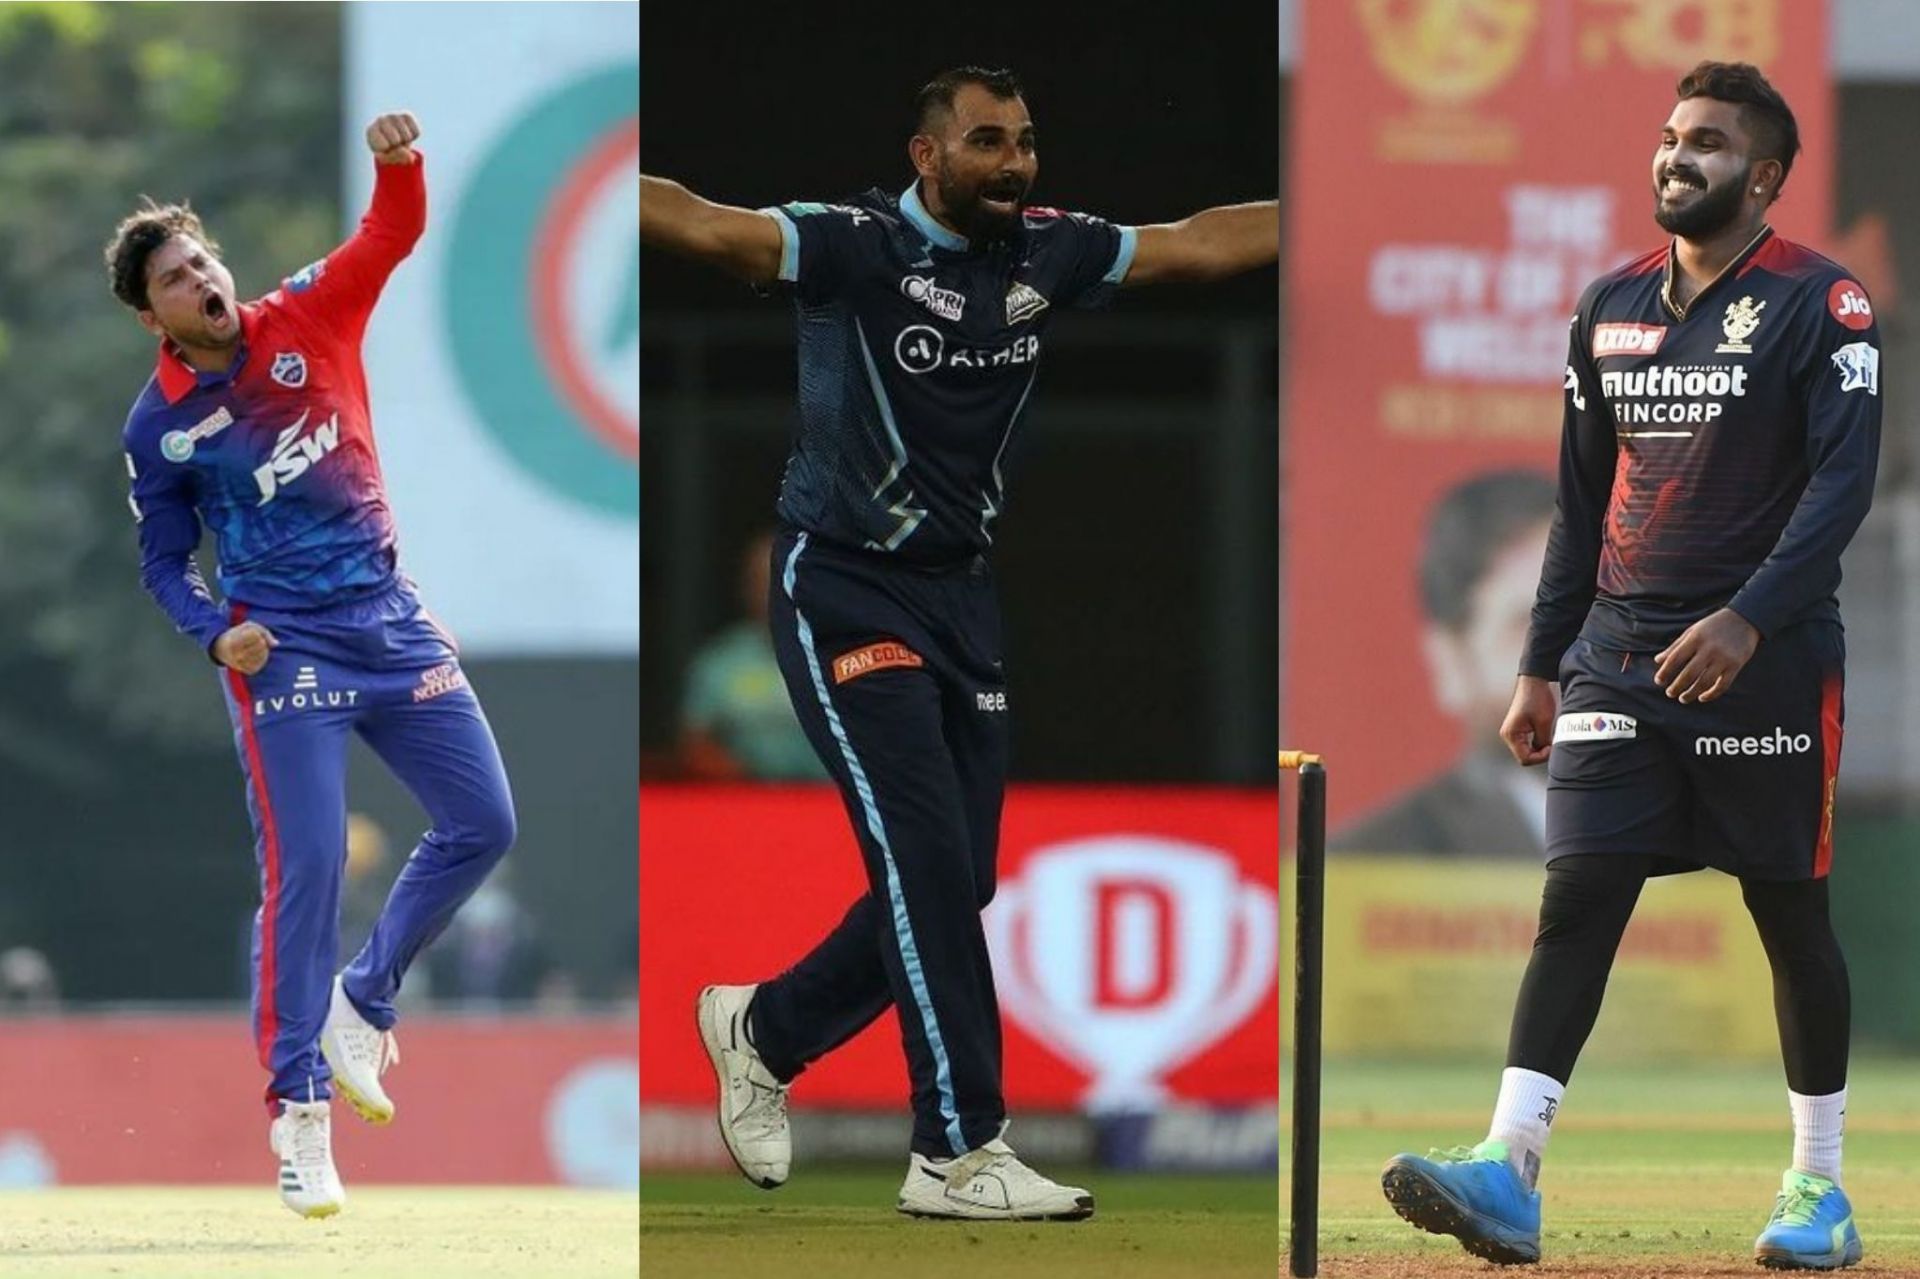 The week 1 of the IPL 2022 saw some terrific bowling performances